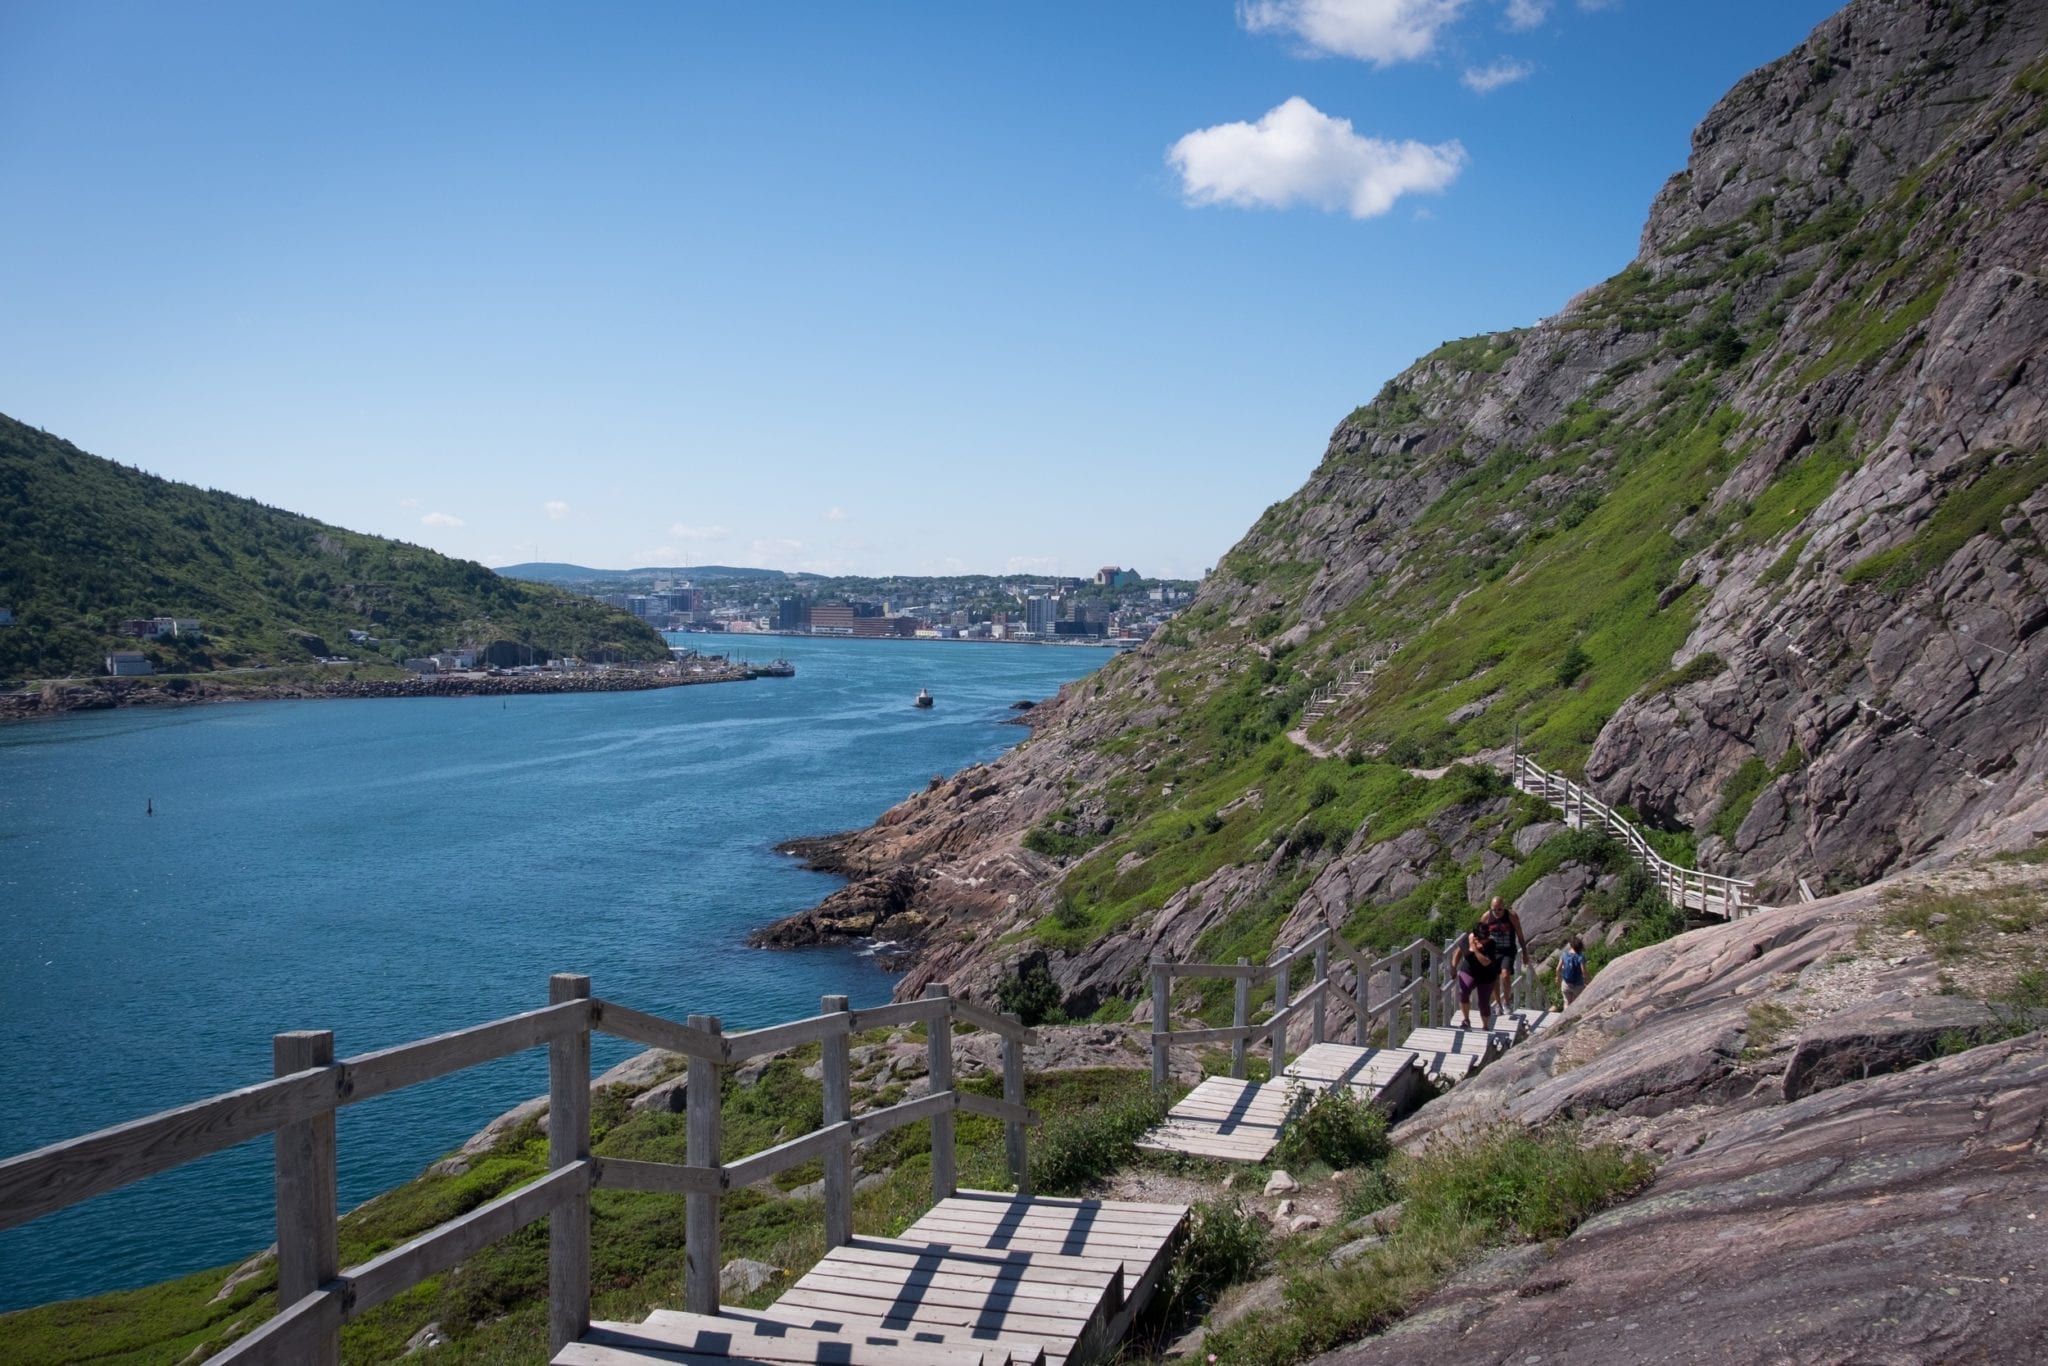 A hiking trail with wooden stairs leading up rocky cliffs in front of the bright blue bay in St. John's, Newfoundland.